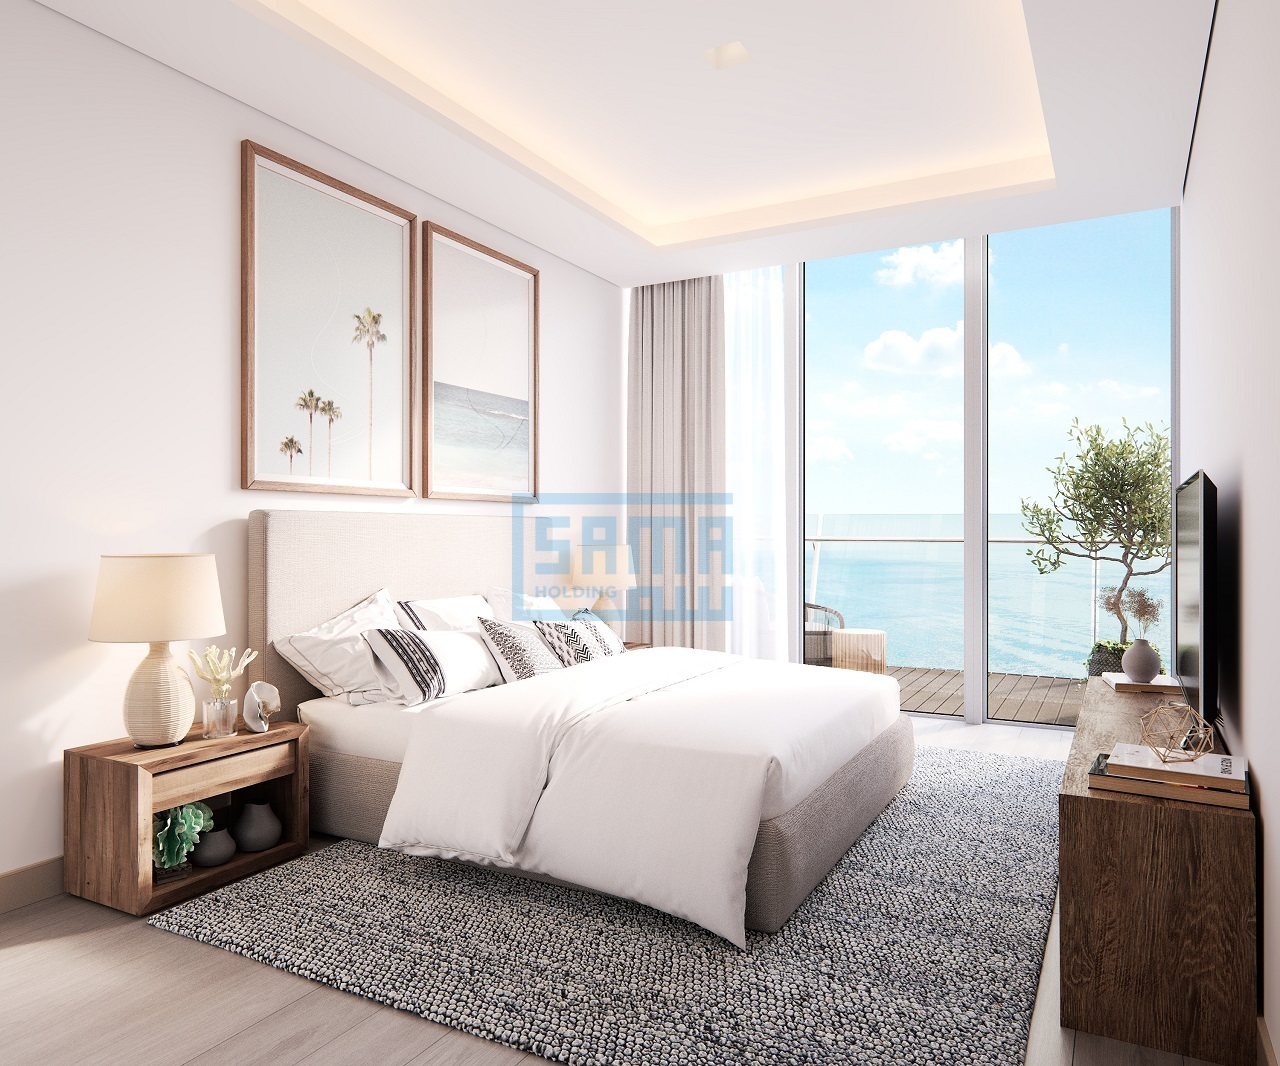 Studio with Magnificent Bay View from Balcony for Sale located at  Yas Beach Residences. Yas Bay, Yas Island, Abu Dhabi